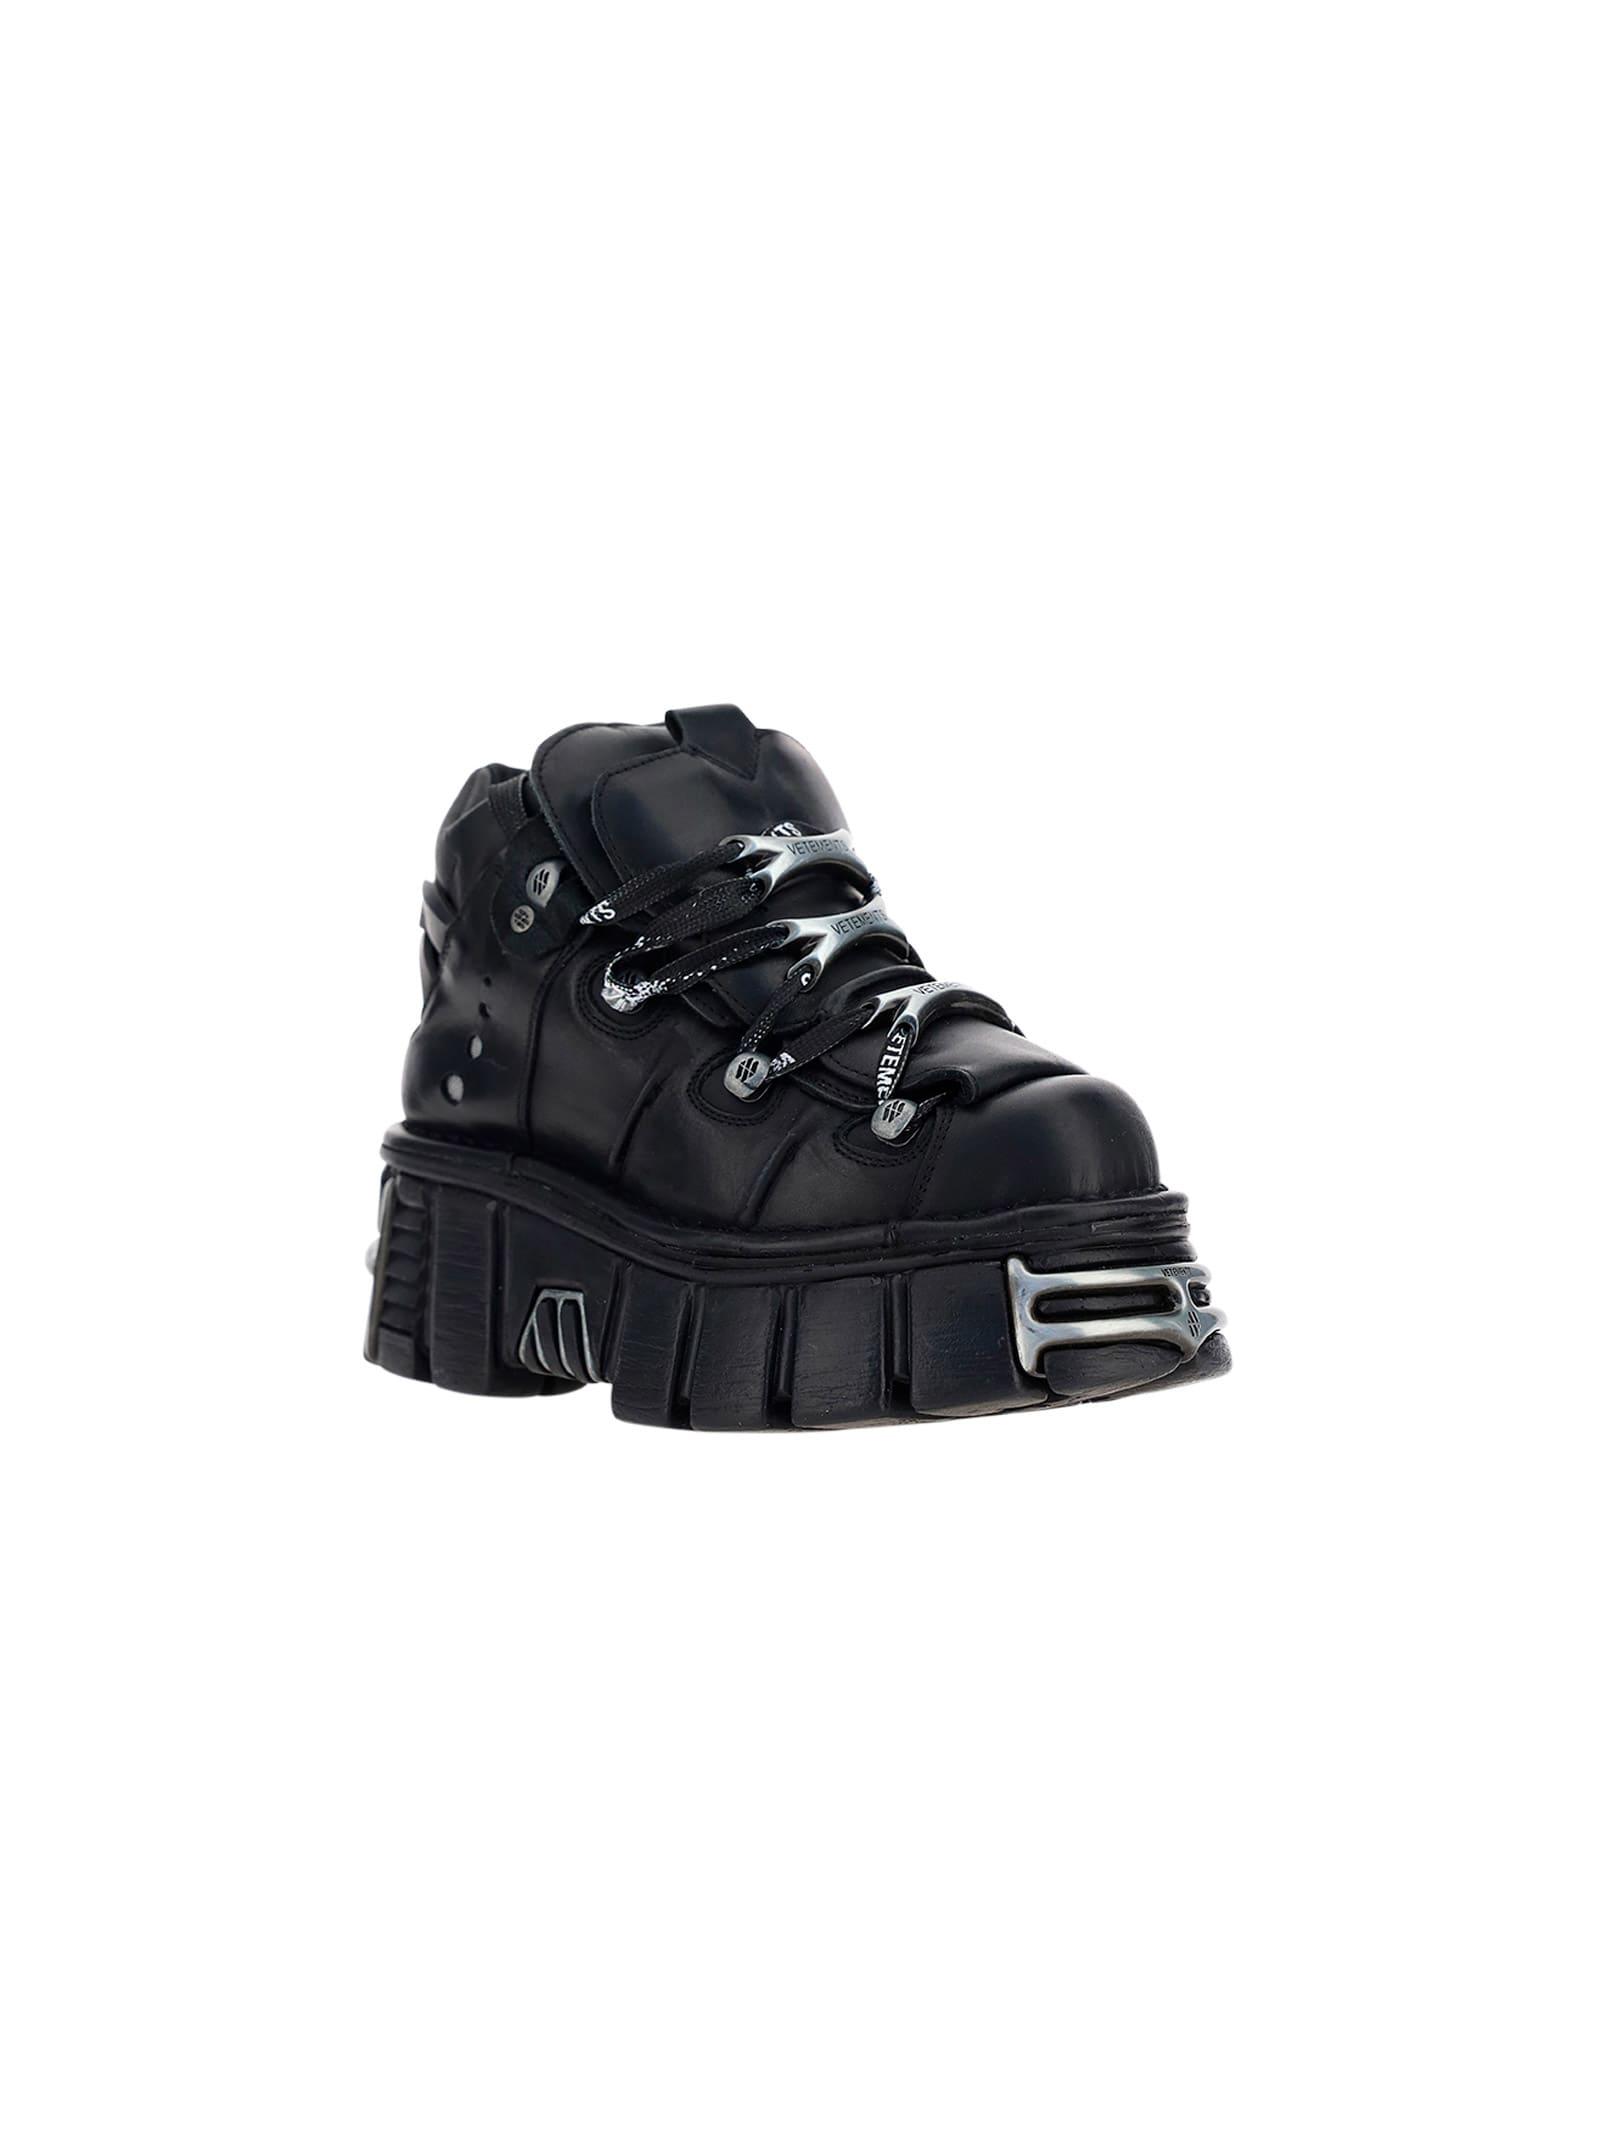 Vetements Leather New Rock Shoes in Nero (Black) - Save 70% | Lyst